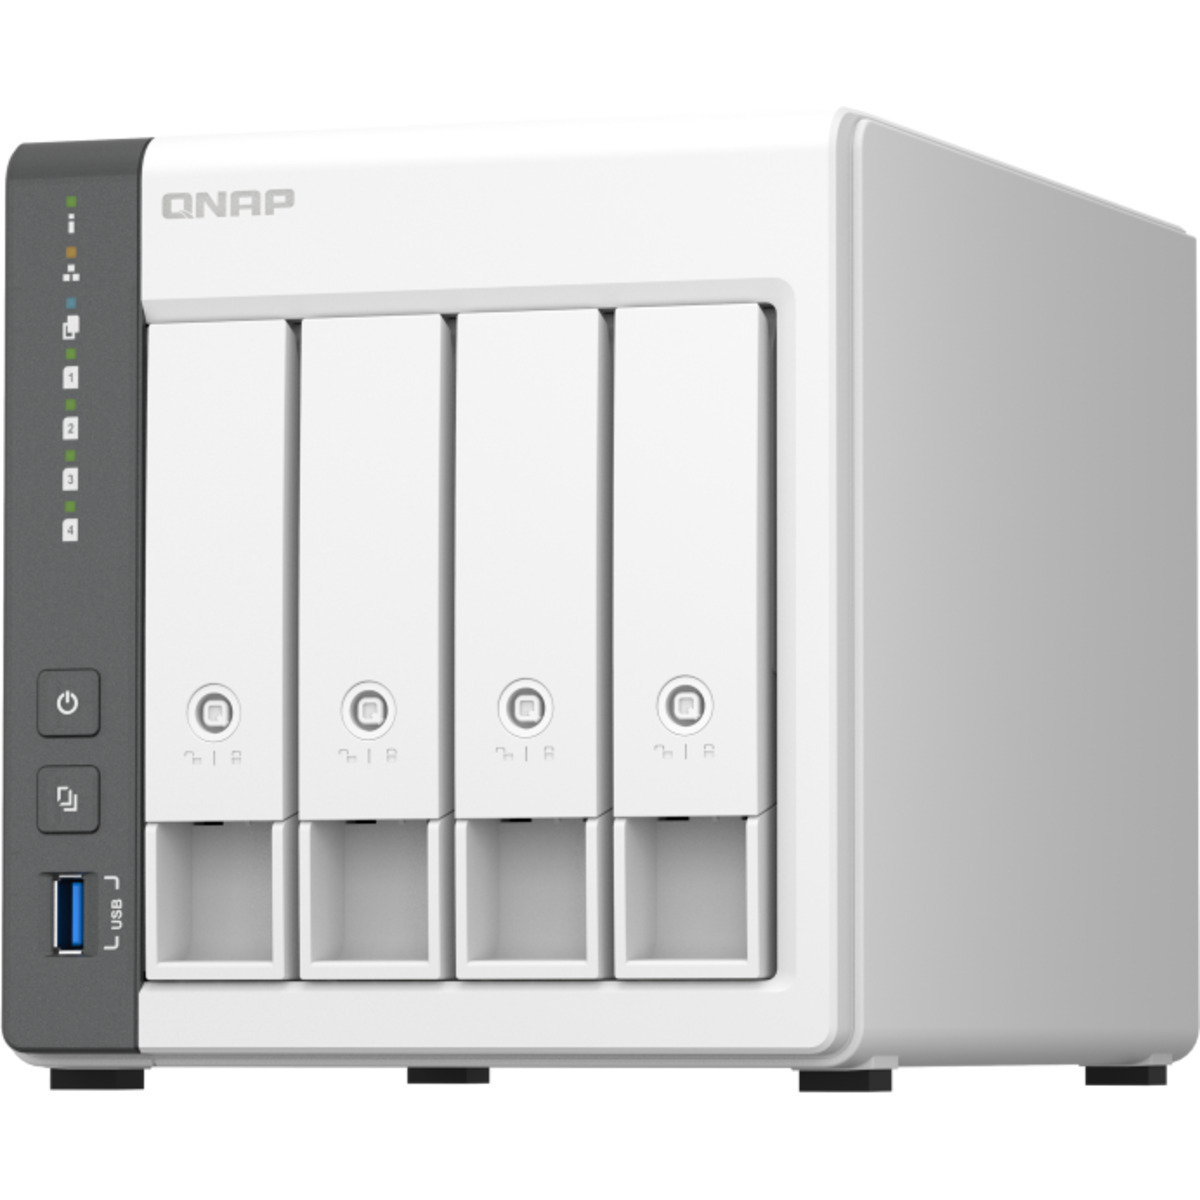 buy QNAP TS-433 16tb Desktop NAS - Network Attached Storage Device 4x4000gb Seagate BarraCuda ST4000DM004 3.5 7200rpm SATA 6Gb/s HDD CONSUMER Class Drives Installed - Burn-In Tested - nas headquarters buy network attached storage server device das new raid-5 free shipping simply usa TS-433